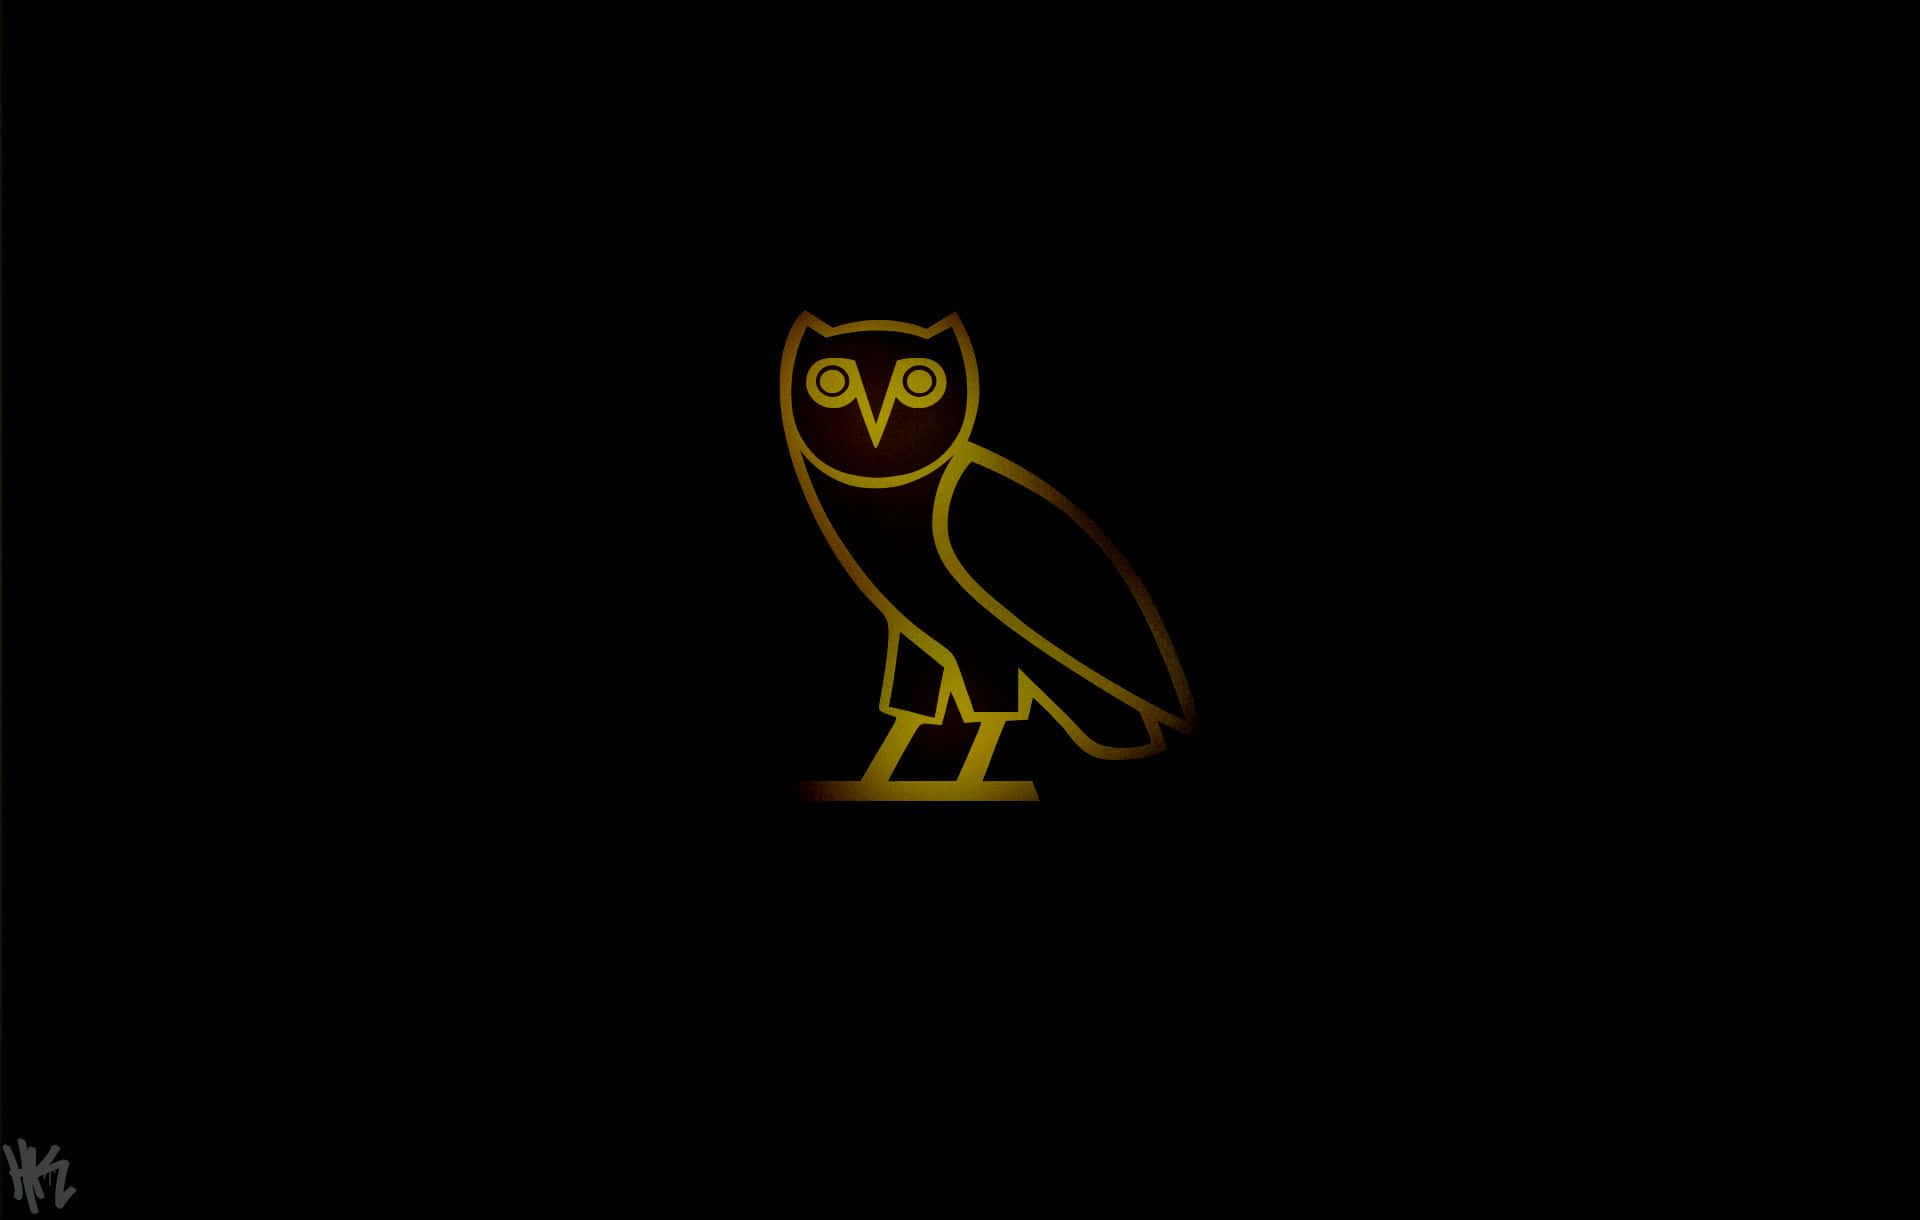 The OVO Owl - Drake's Iconic Logo An iPhone Background Wallpaper